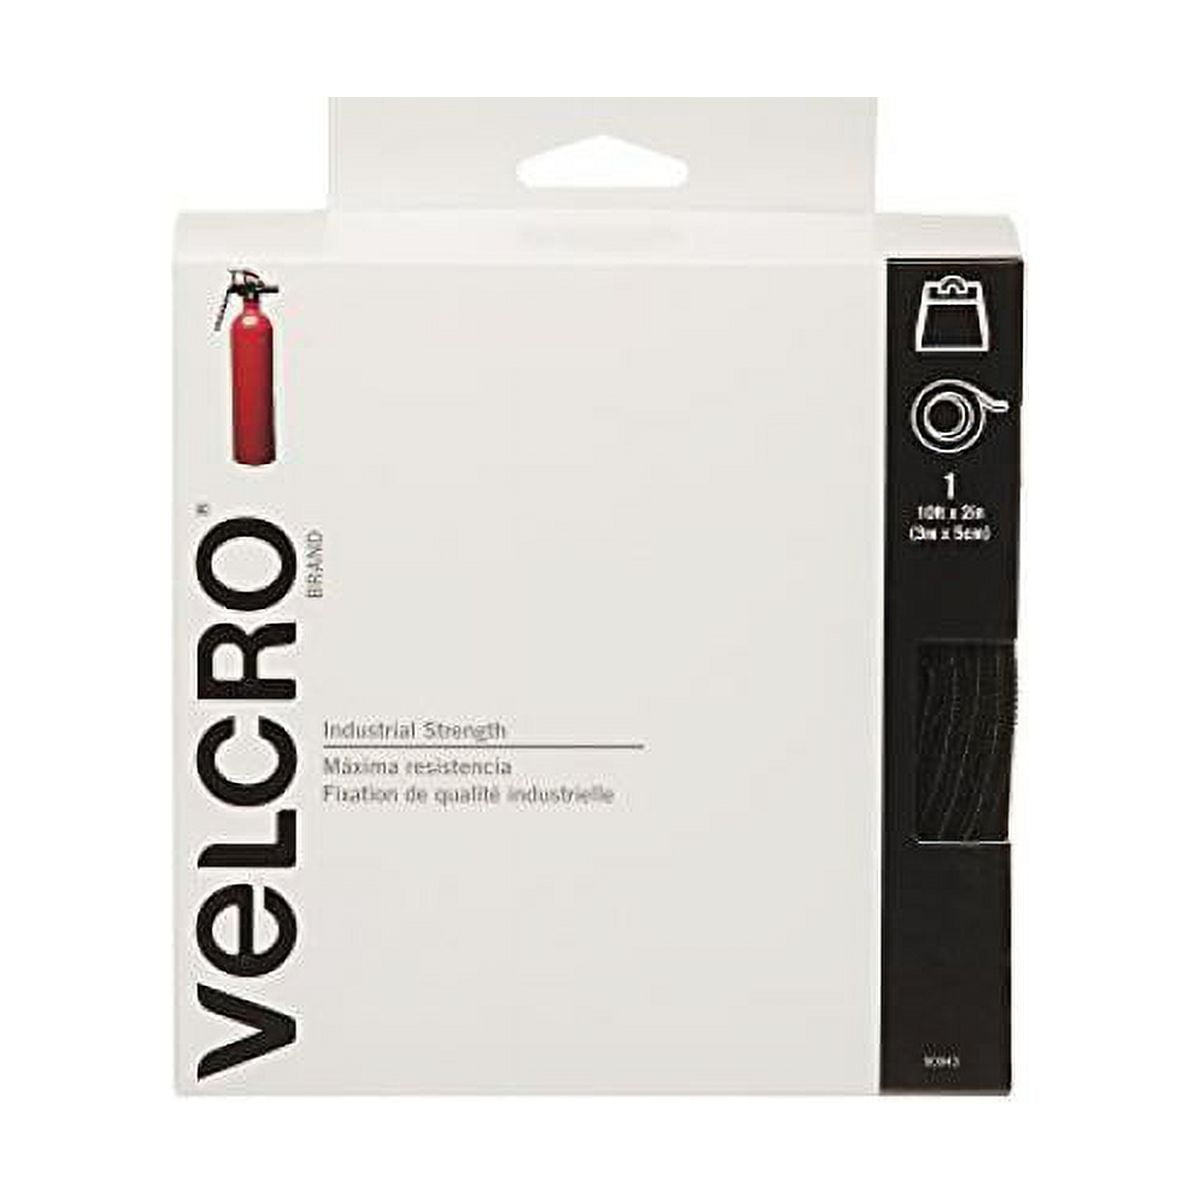 VELCRO Brand Heavy Duty Tape with Adhesive - Cut Strips to Length - Holds  10 lbs, Black - Industrial Strength Roll, Wide 10Ft x 2In - Strong Hold for